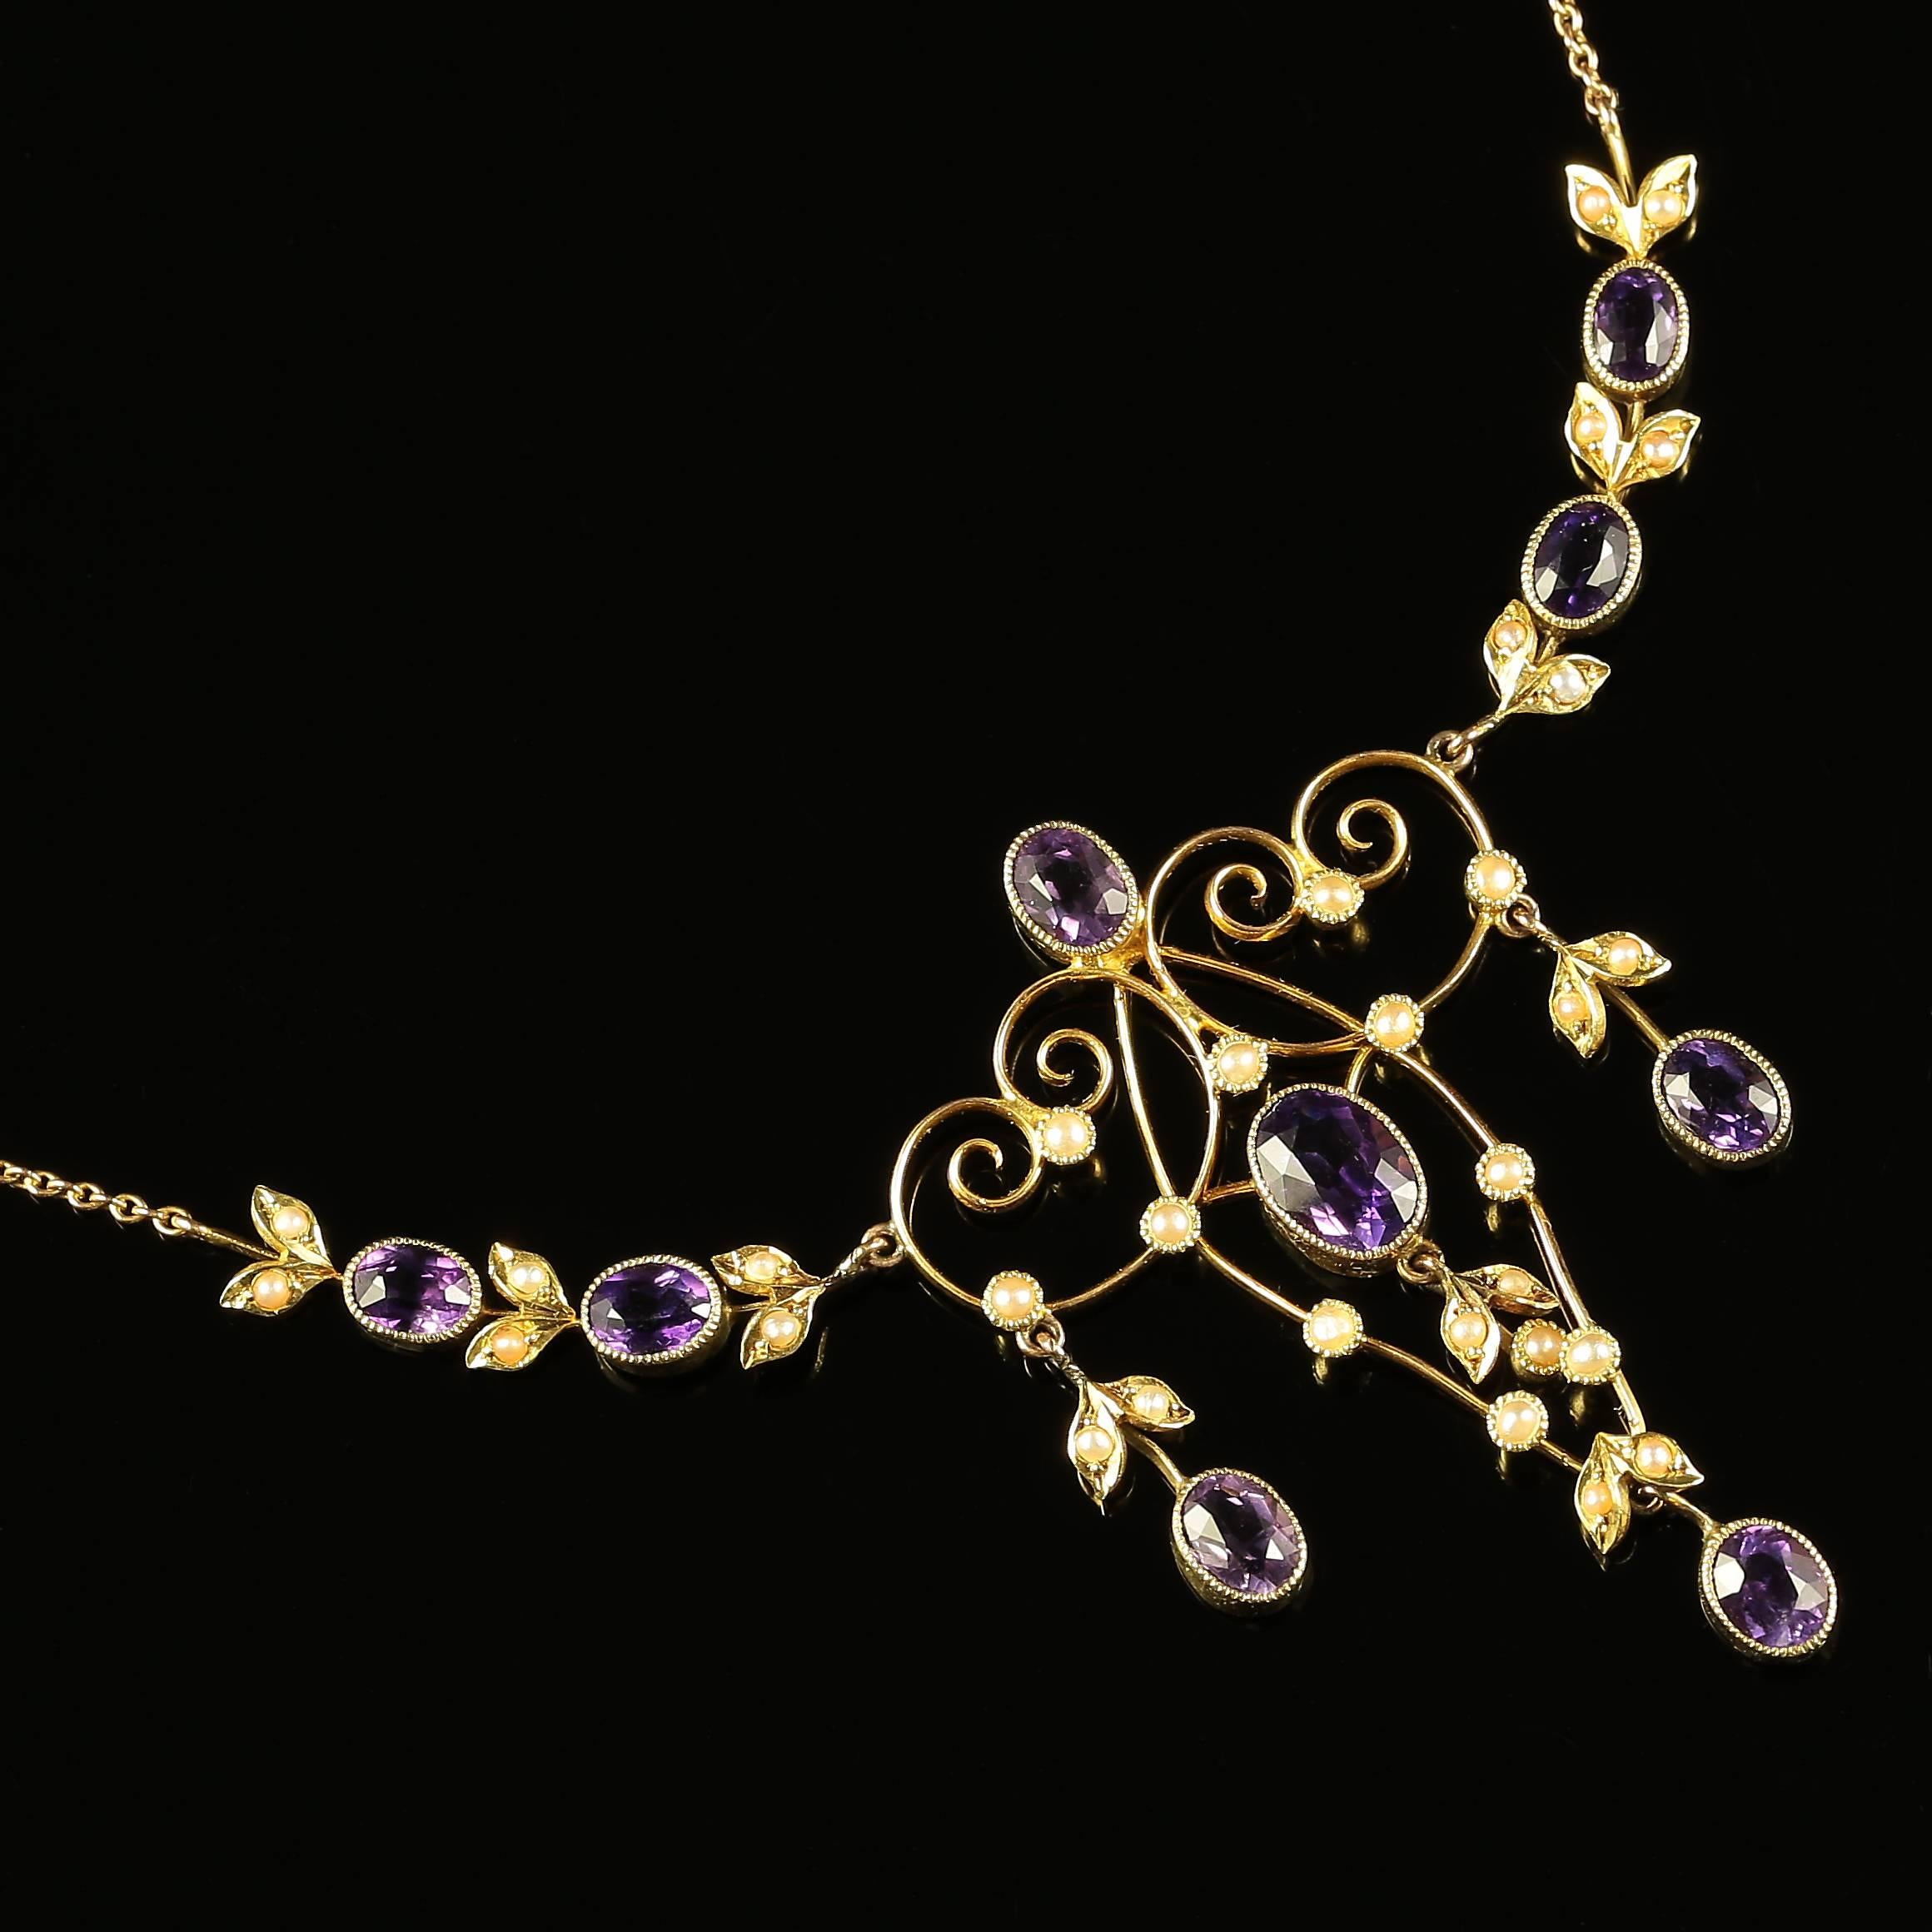 This beautiful genuine Edwardian Antique 9ct yellow gold necklace is steeped in English history. 

Adorned with beautiful rich Velvet Amethyst and rich lustrous pearls. 

This is all Edwardian not a reproduction. 

The Purple Amethyst has been